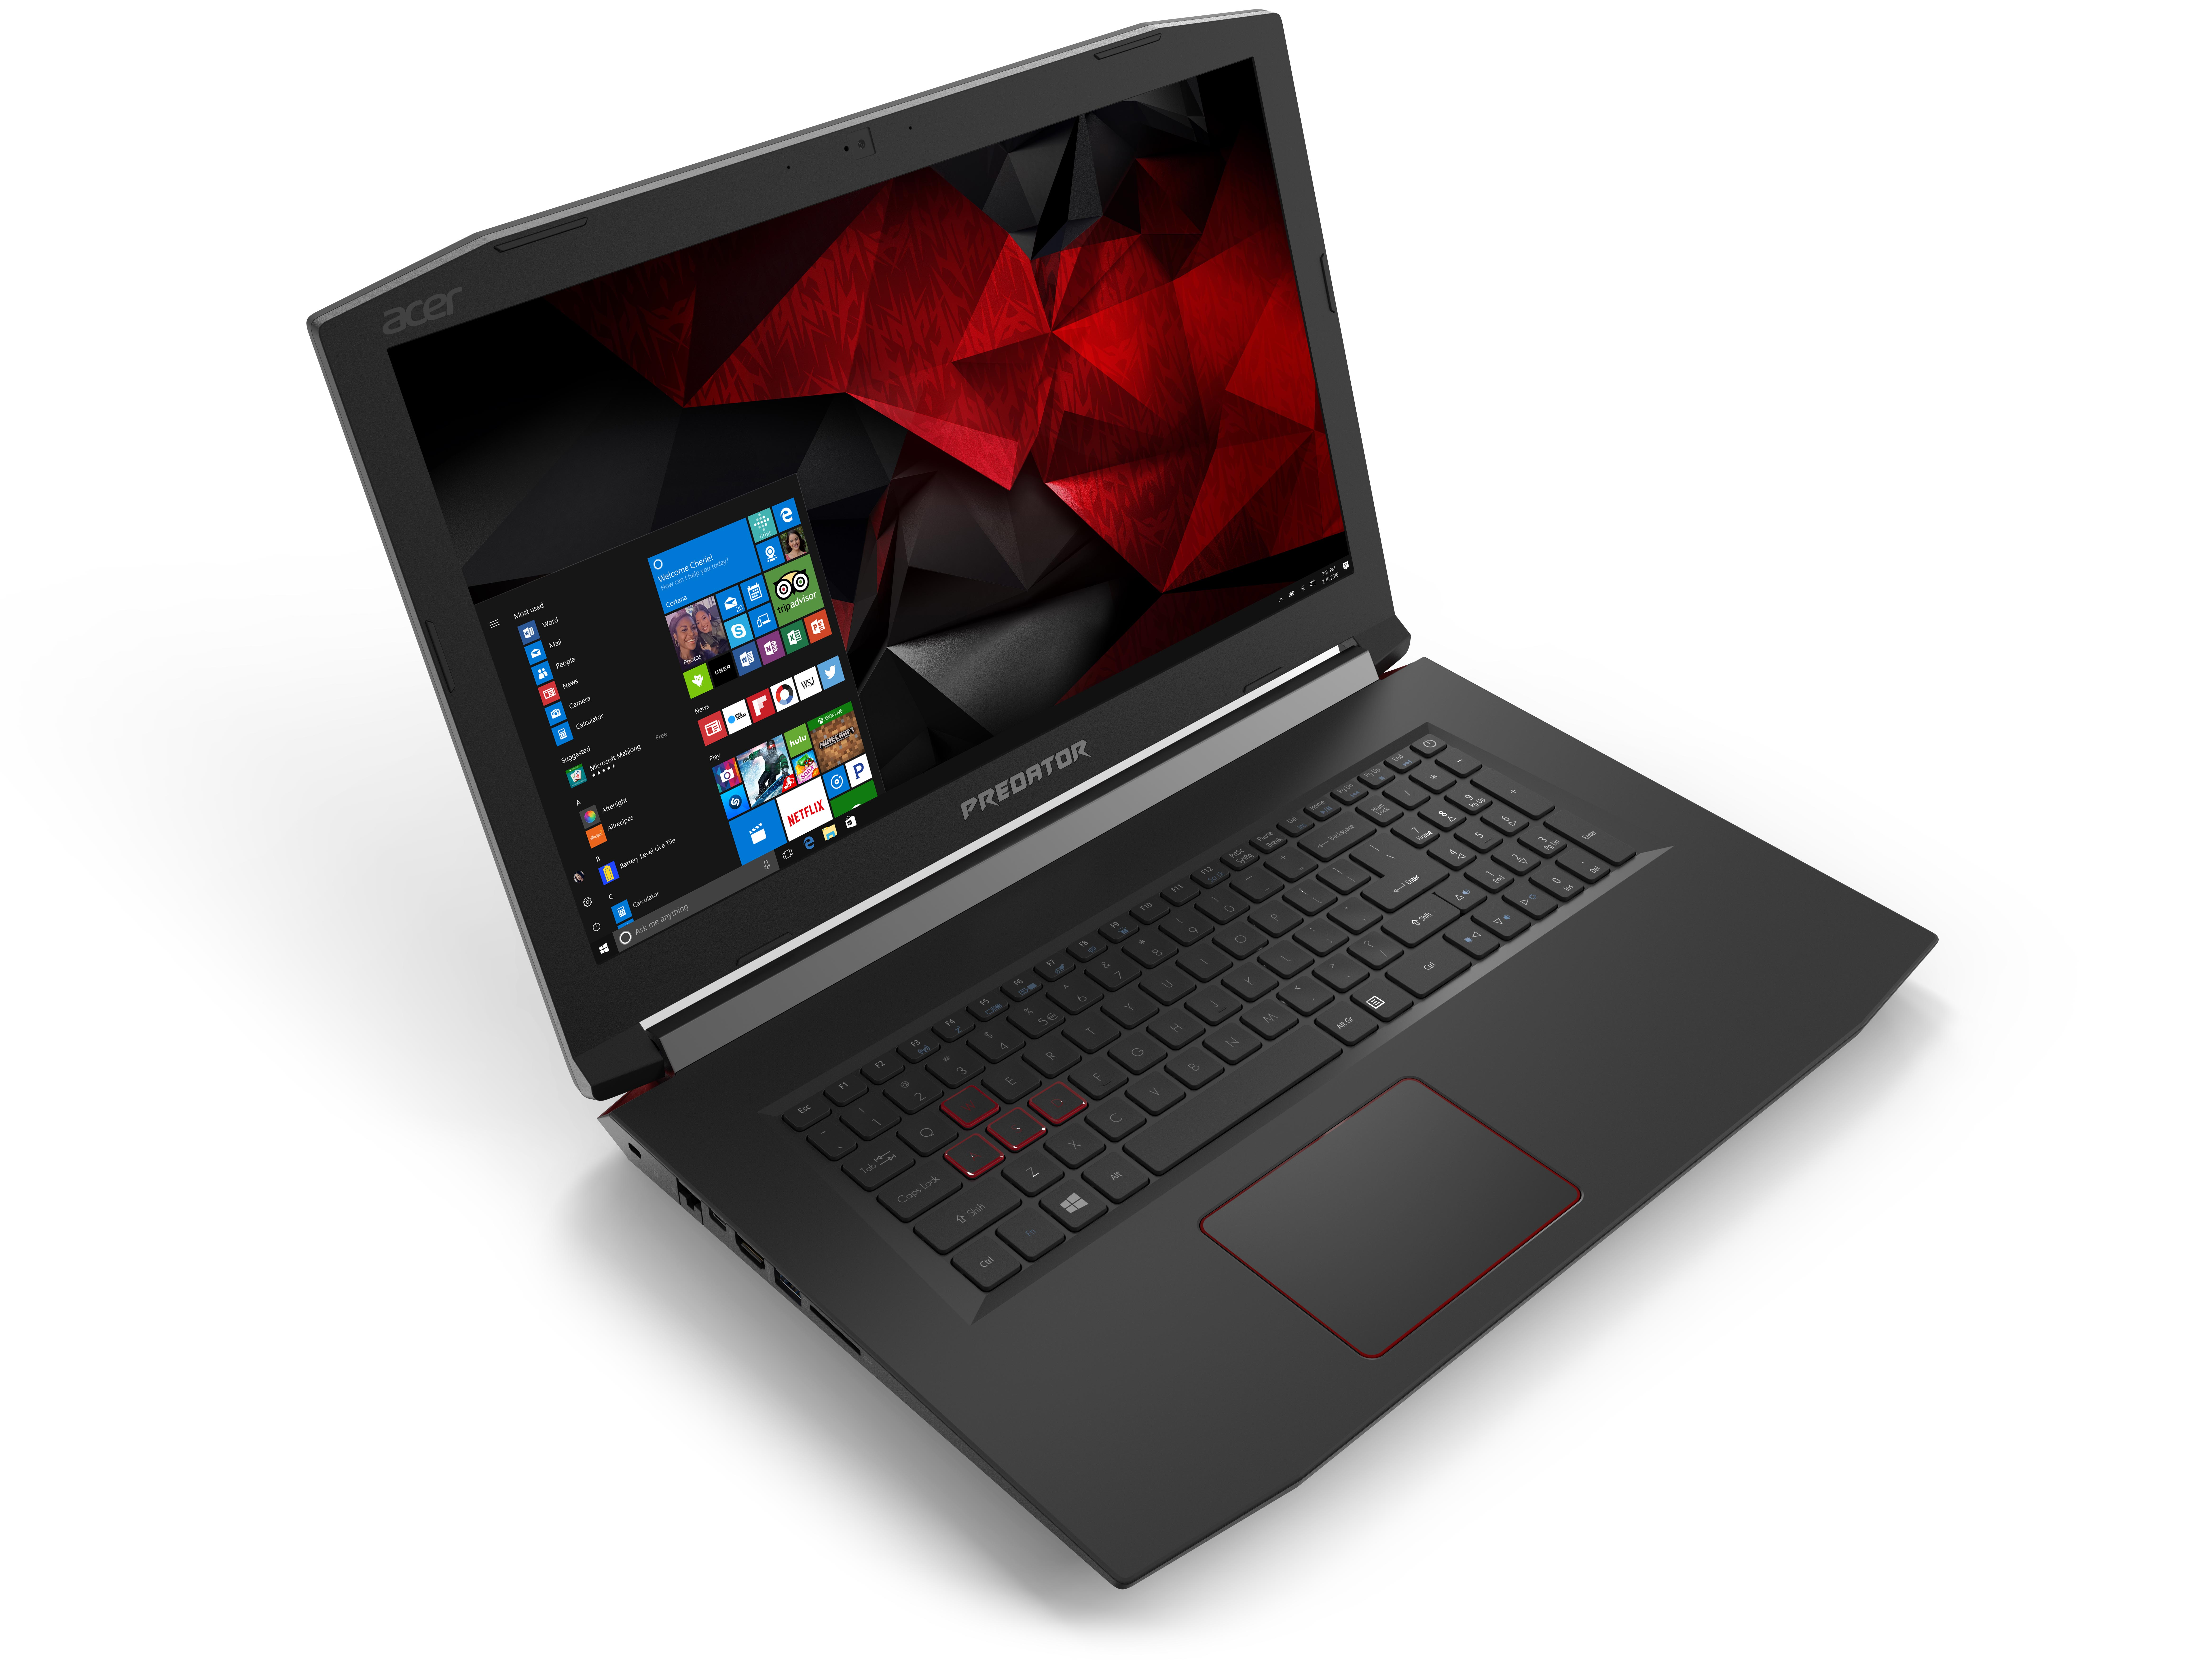 The new powerful Predator Helios 300 gaming notebook line offers strong performance at midrange prices